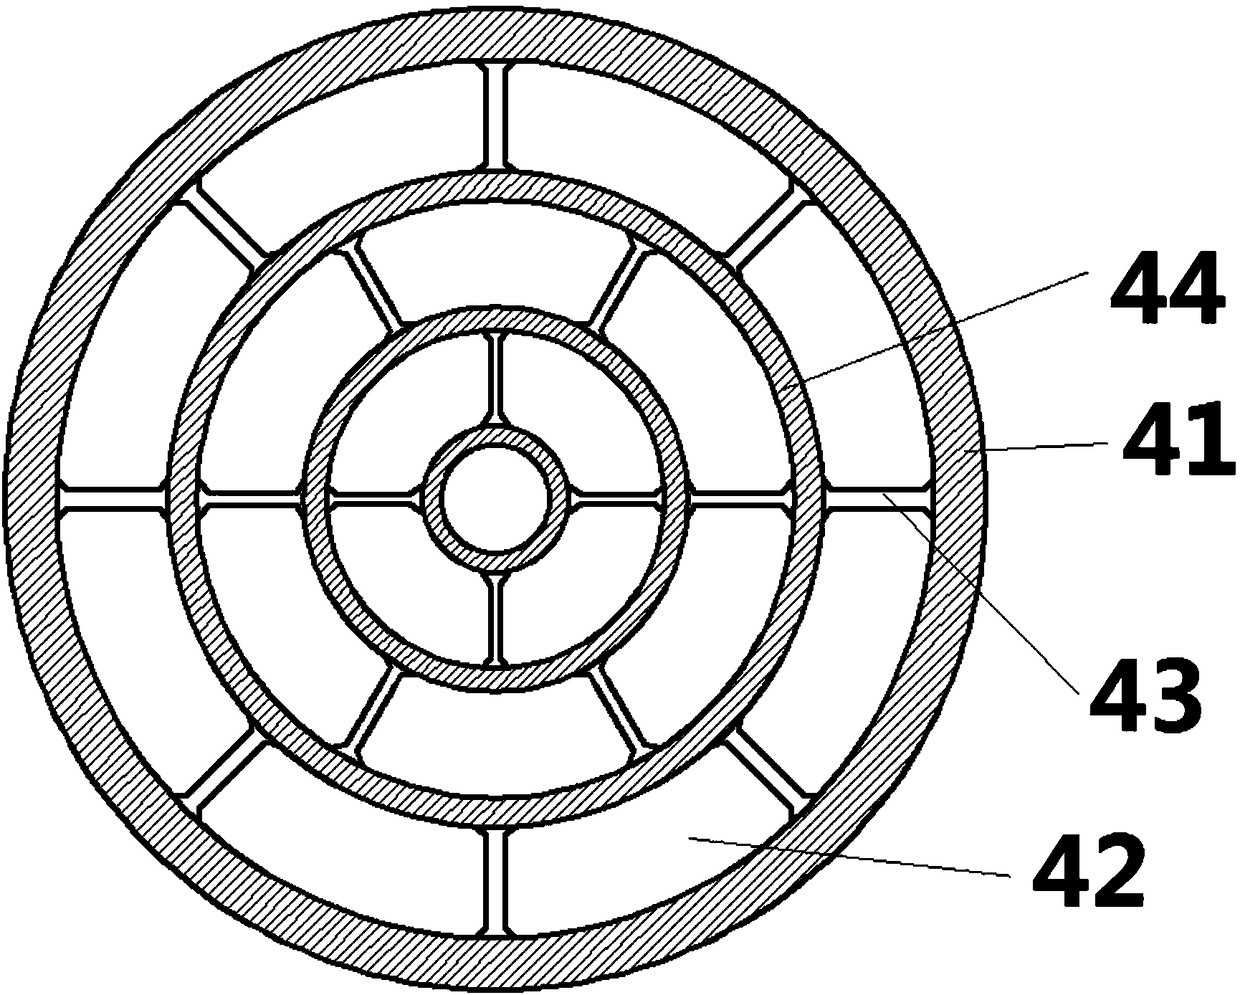 A loop heat pipe with an annular divider with variable spacing in the height direction